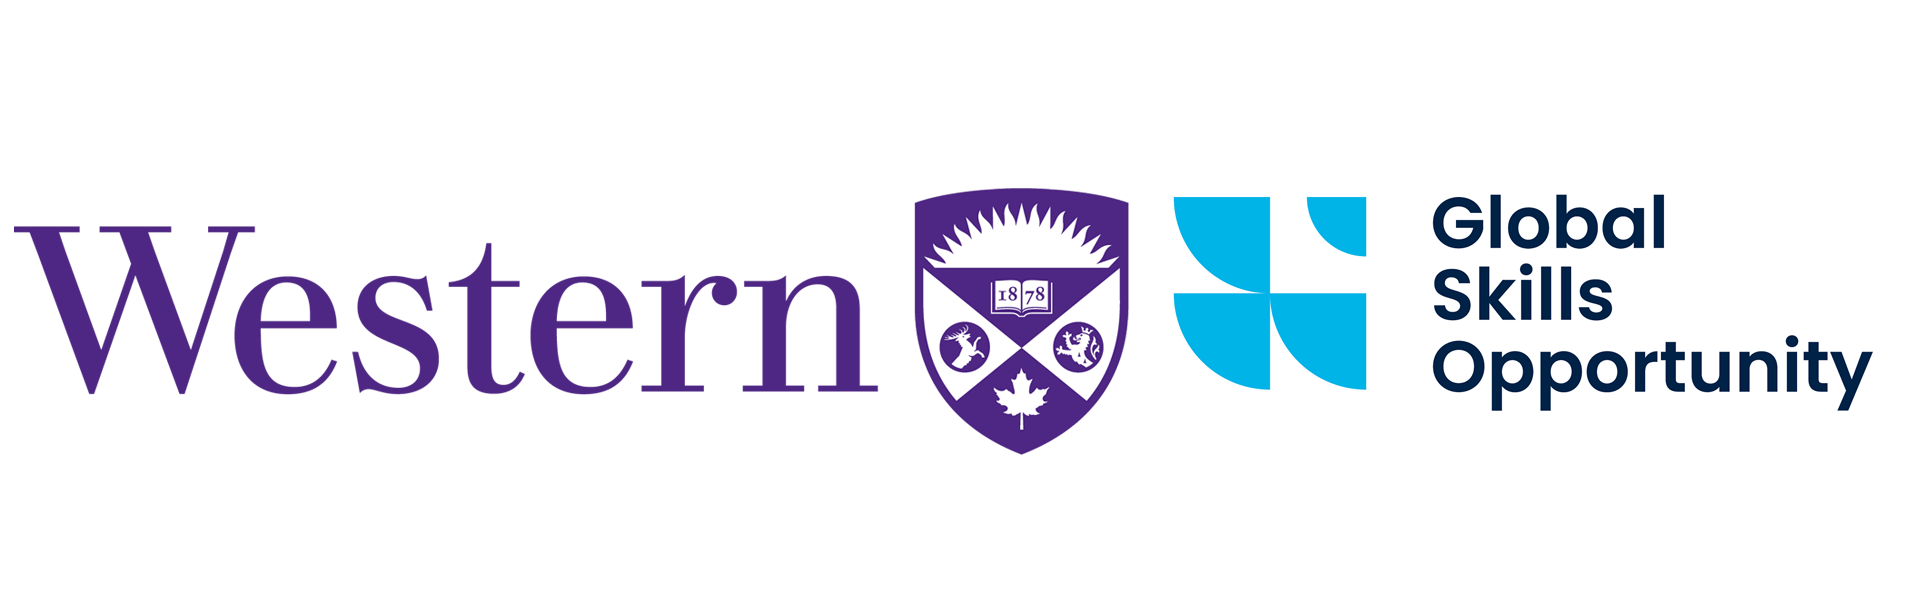 Western University and Global Skills opportunity